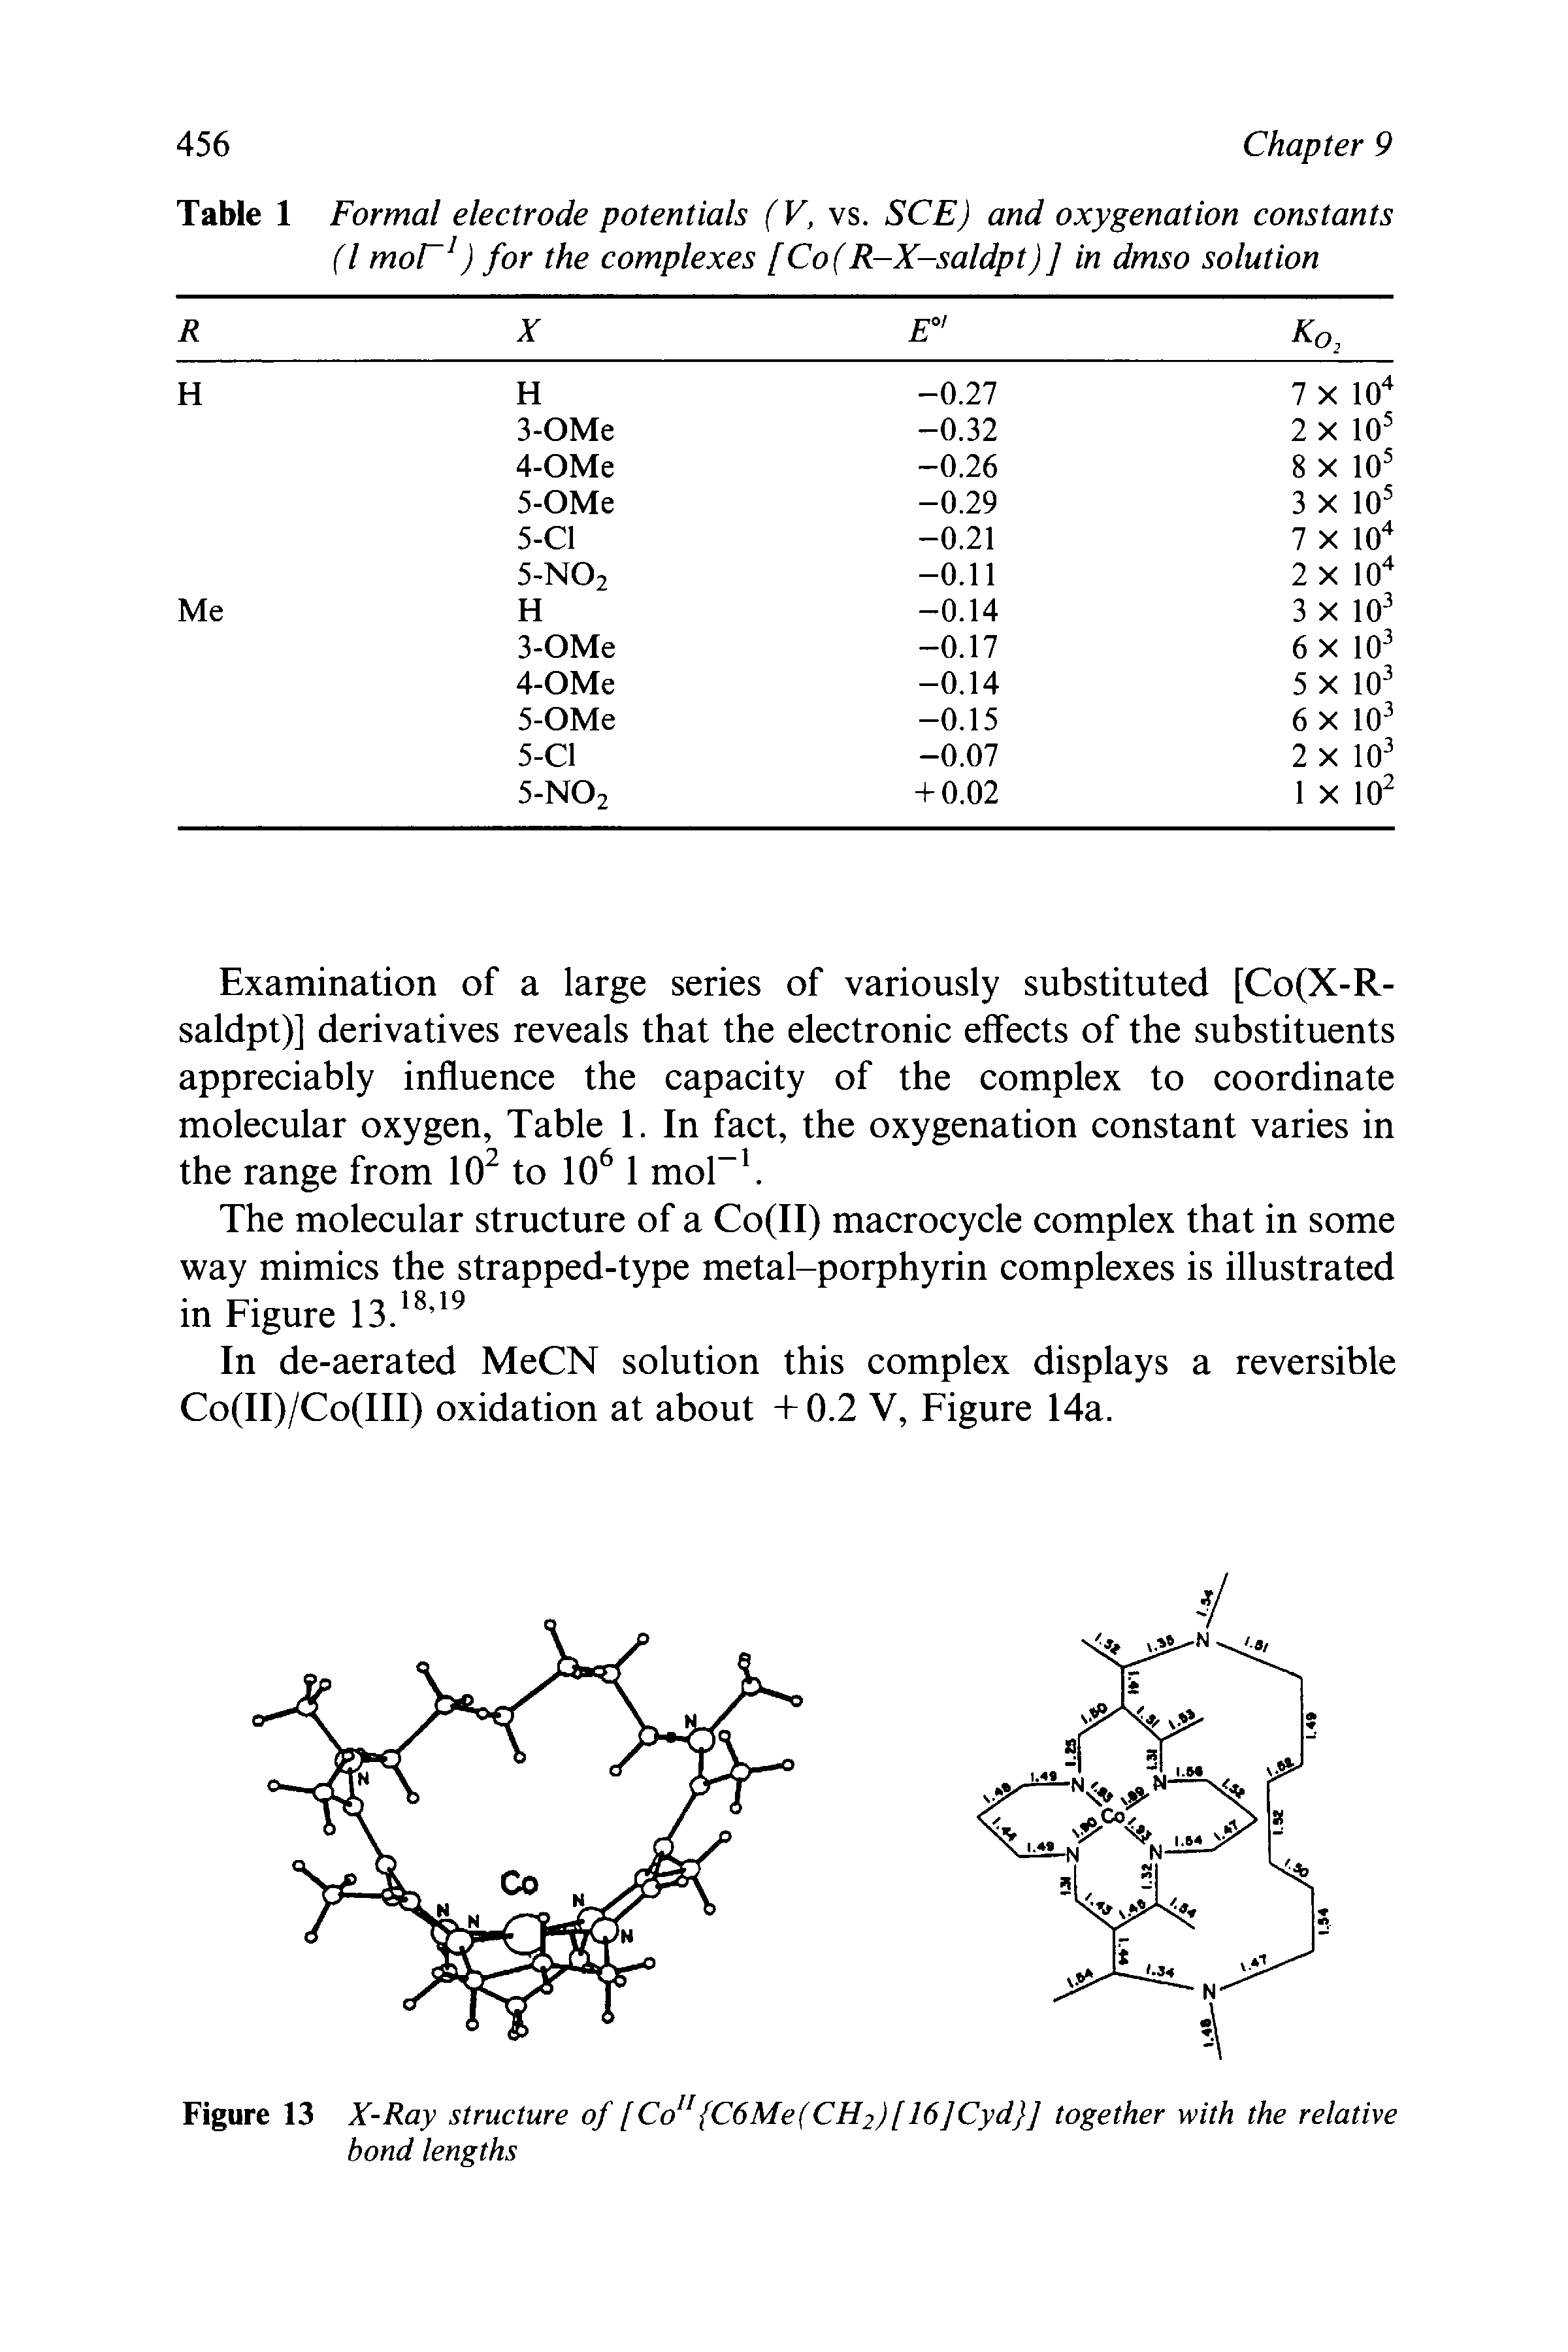 Table 1 Formal electrode potentials (V, vs. SCE) and oxygenation constants (l mor1) for the complexes [Co(R-X-saldpt) ] in dmso solution...